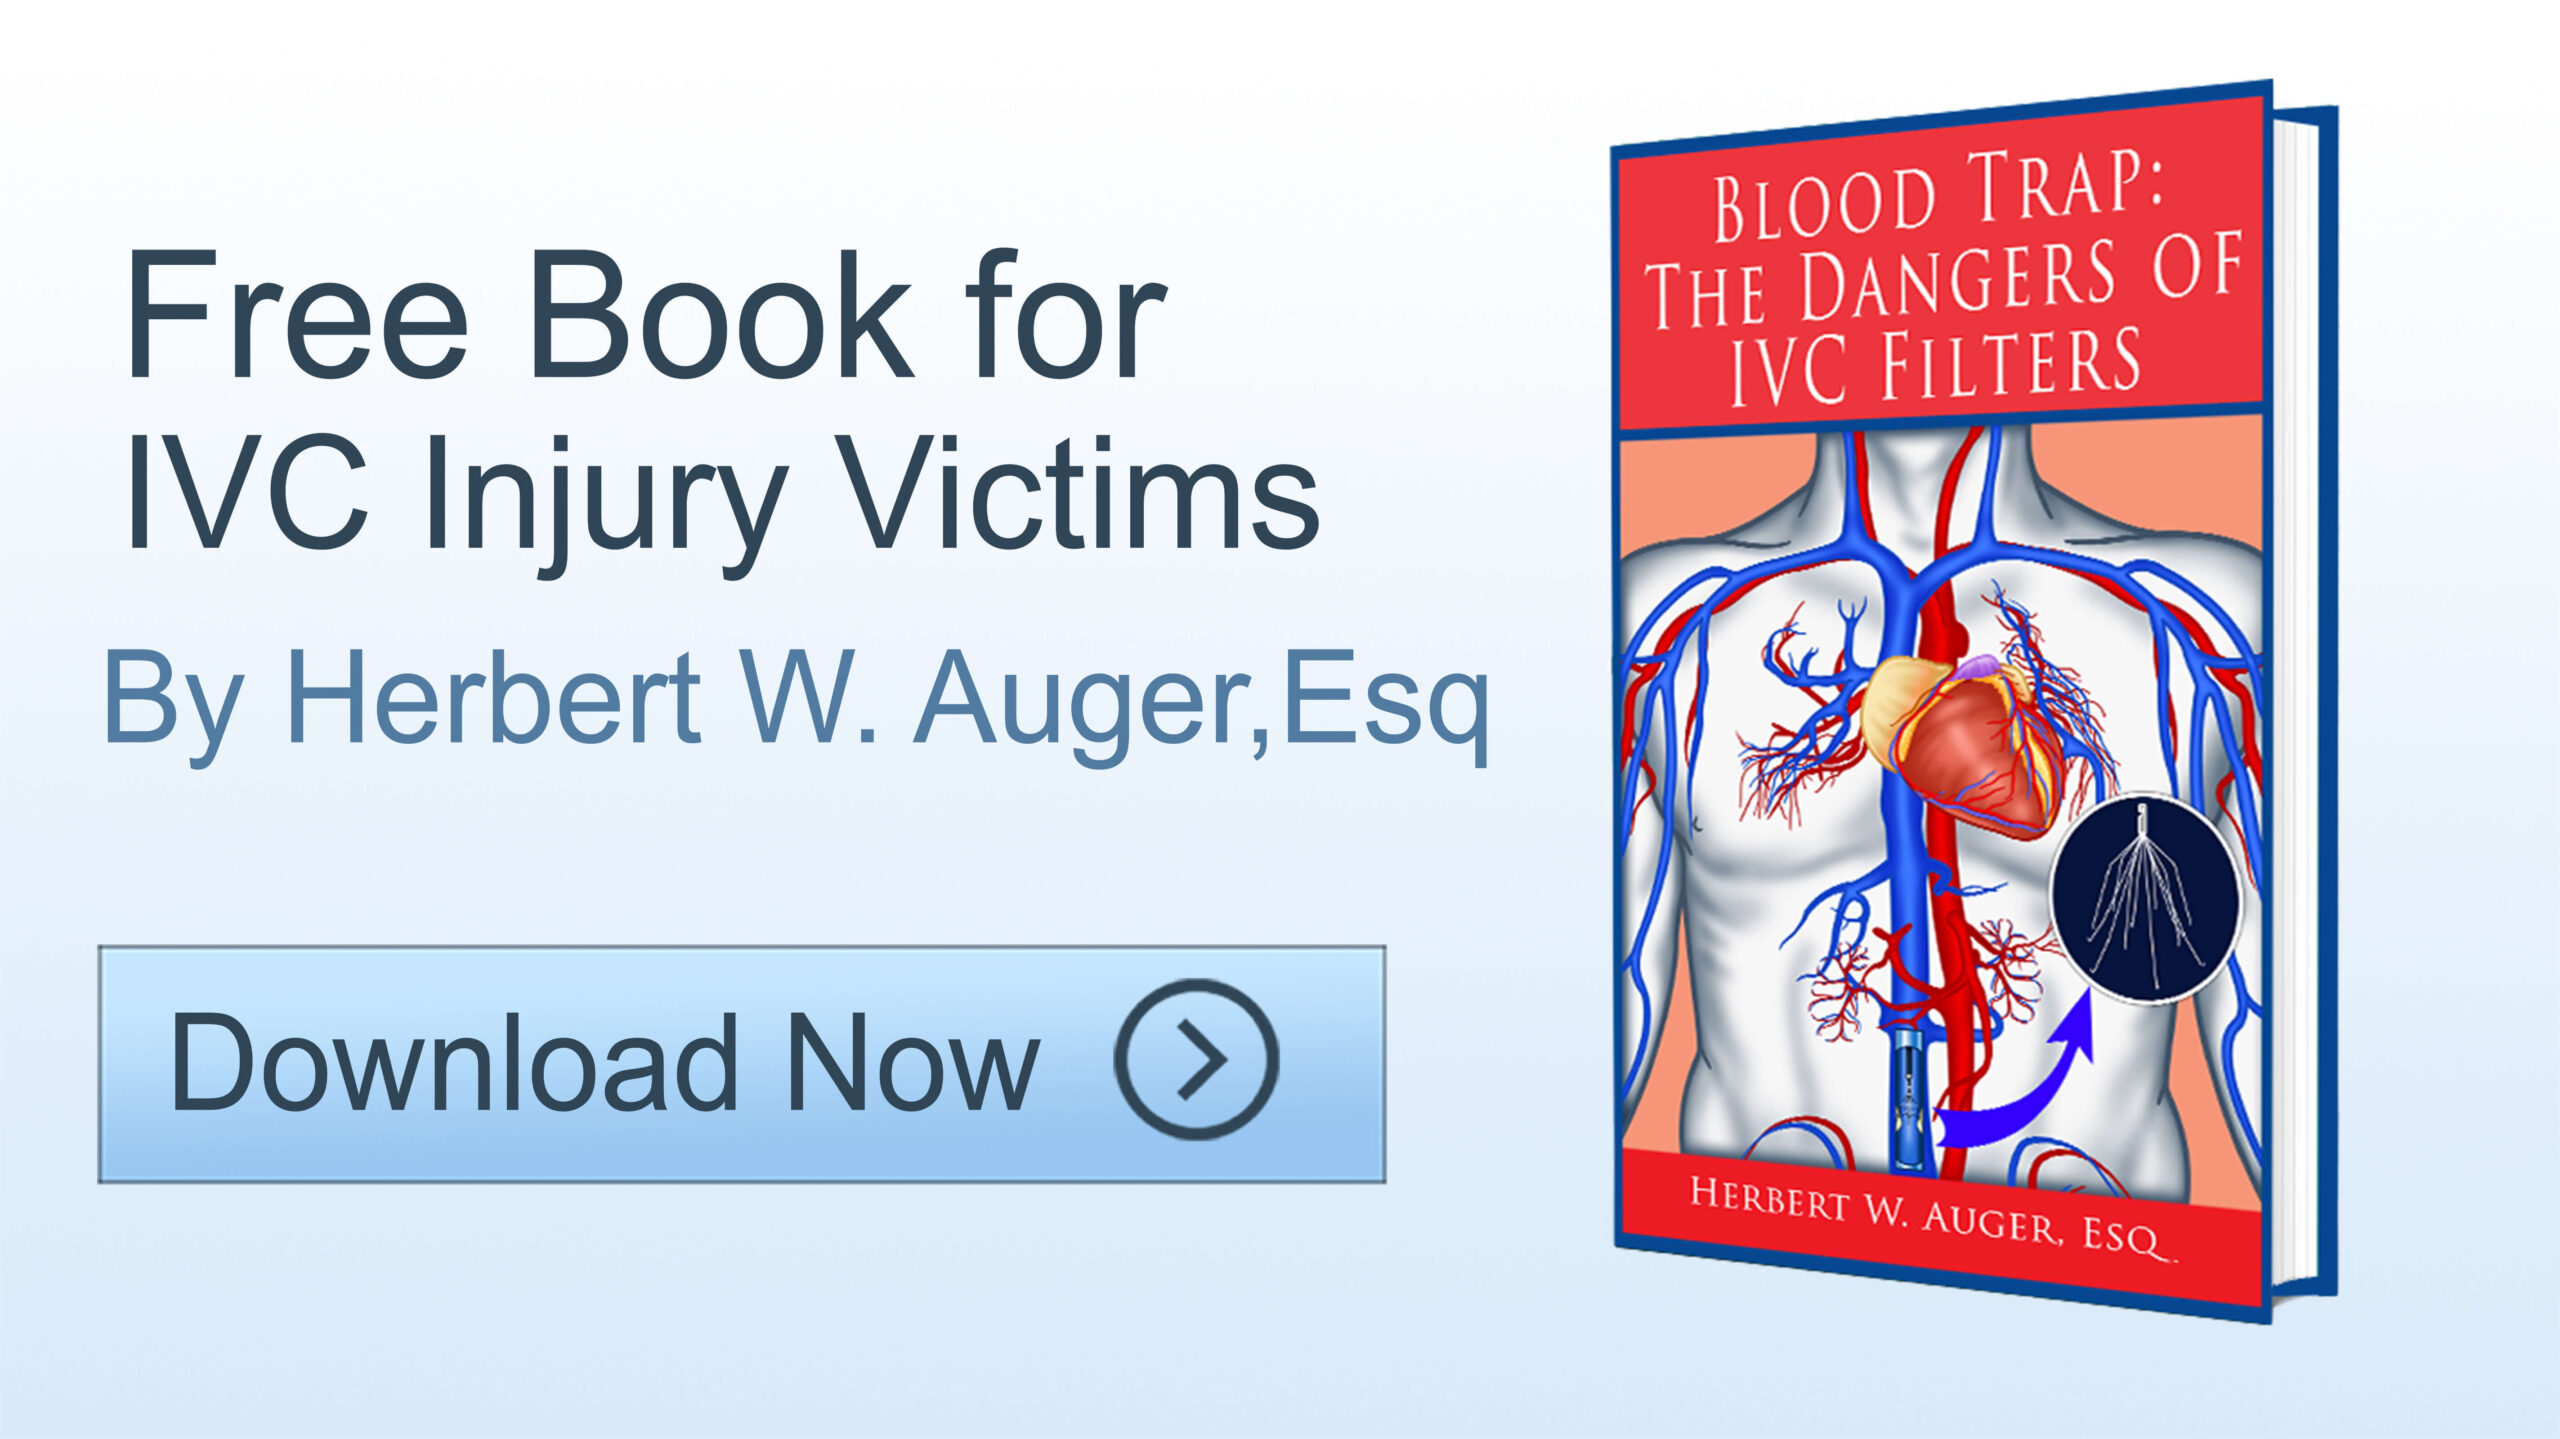 Download free eBook for IVC injury victims